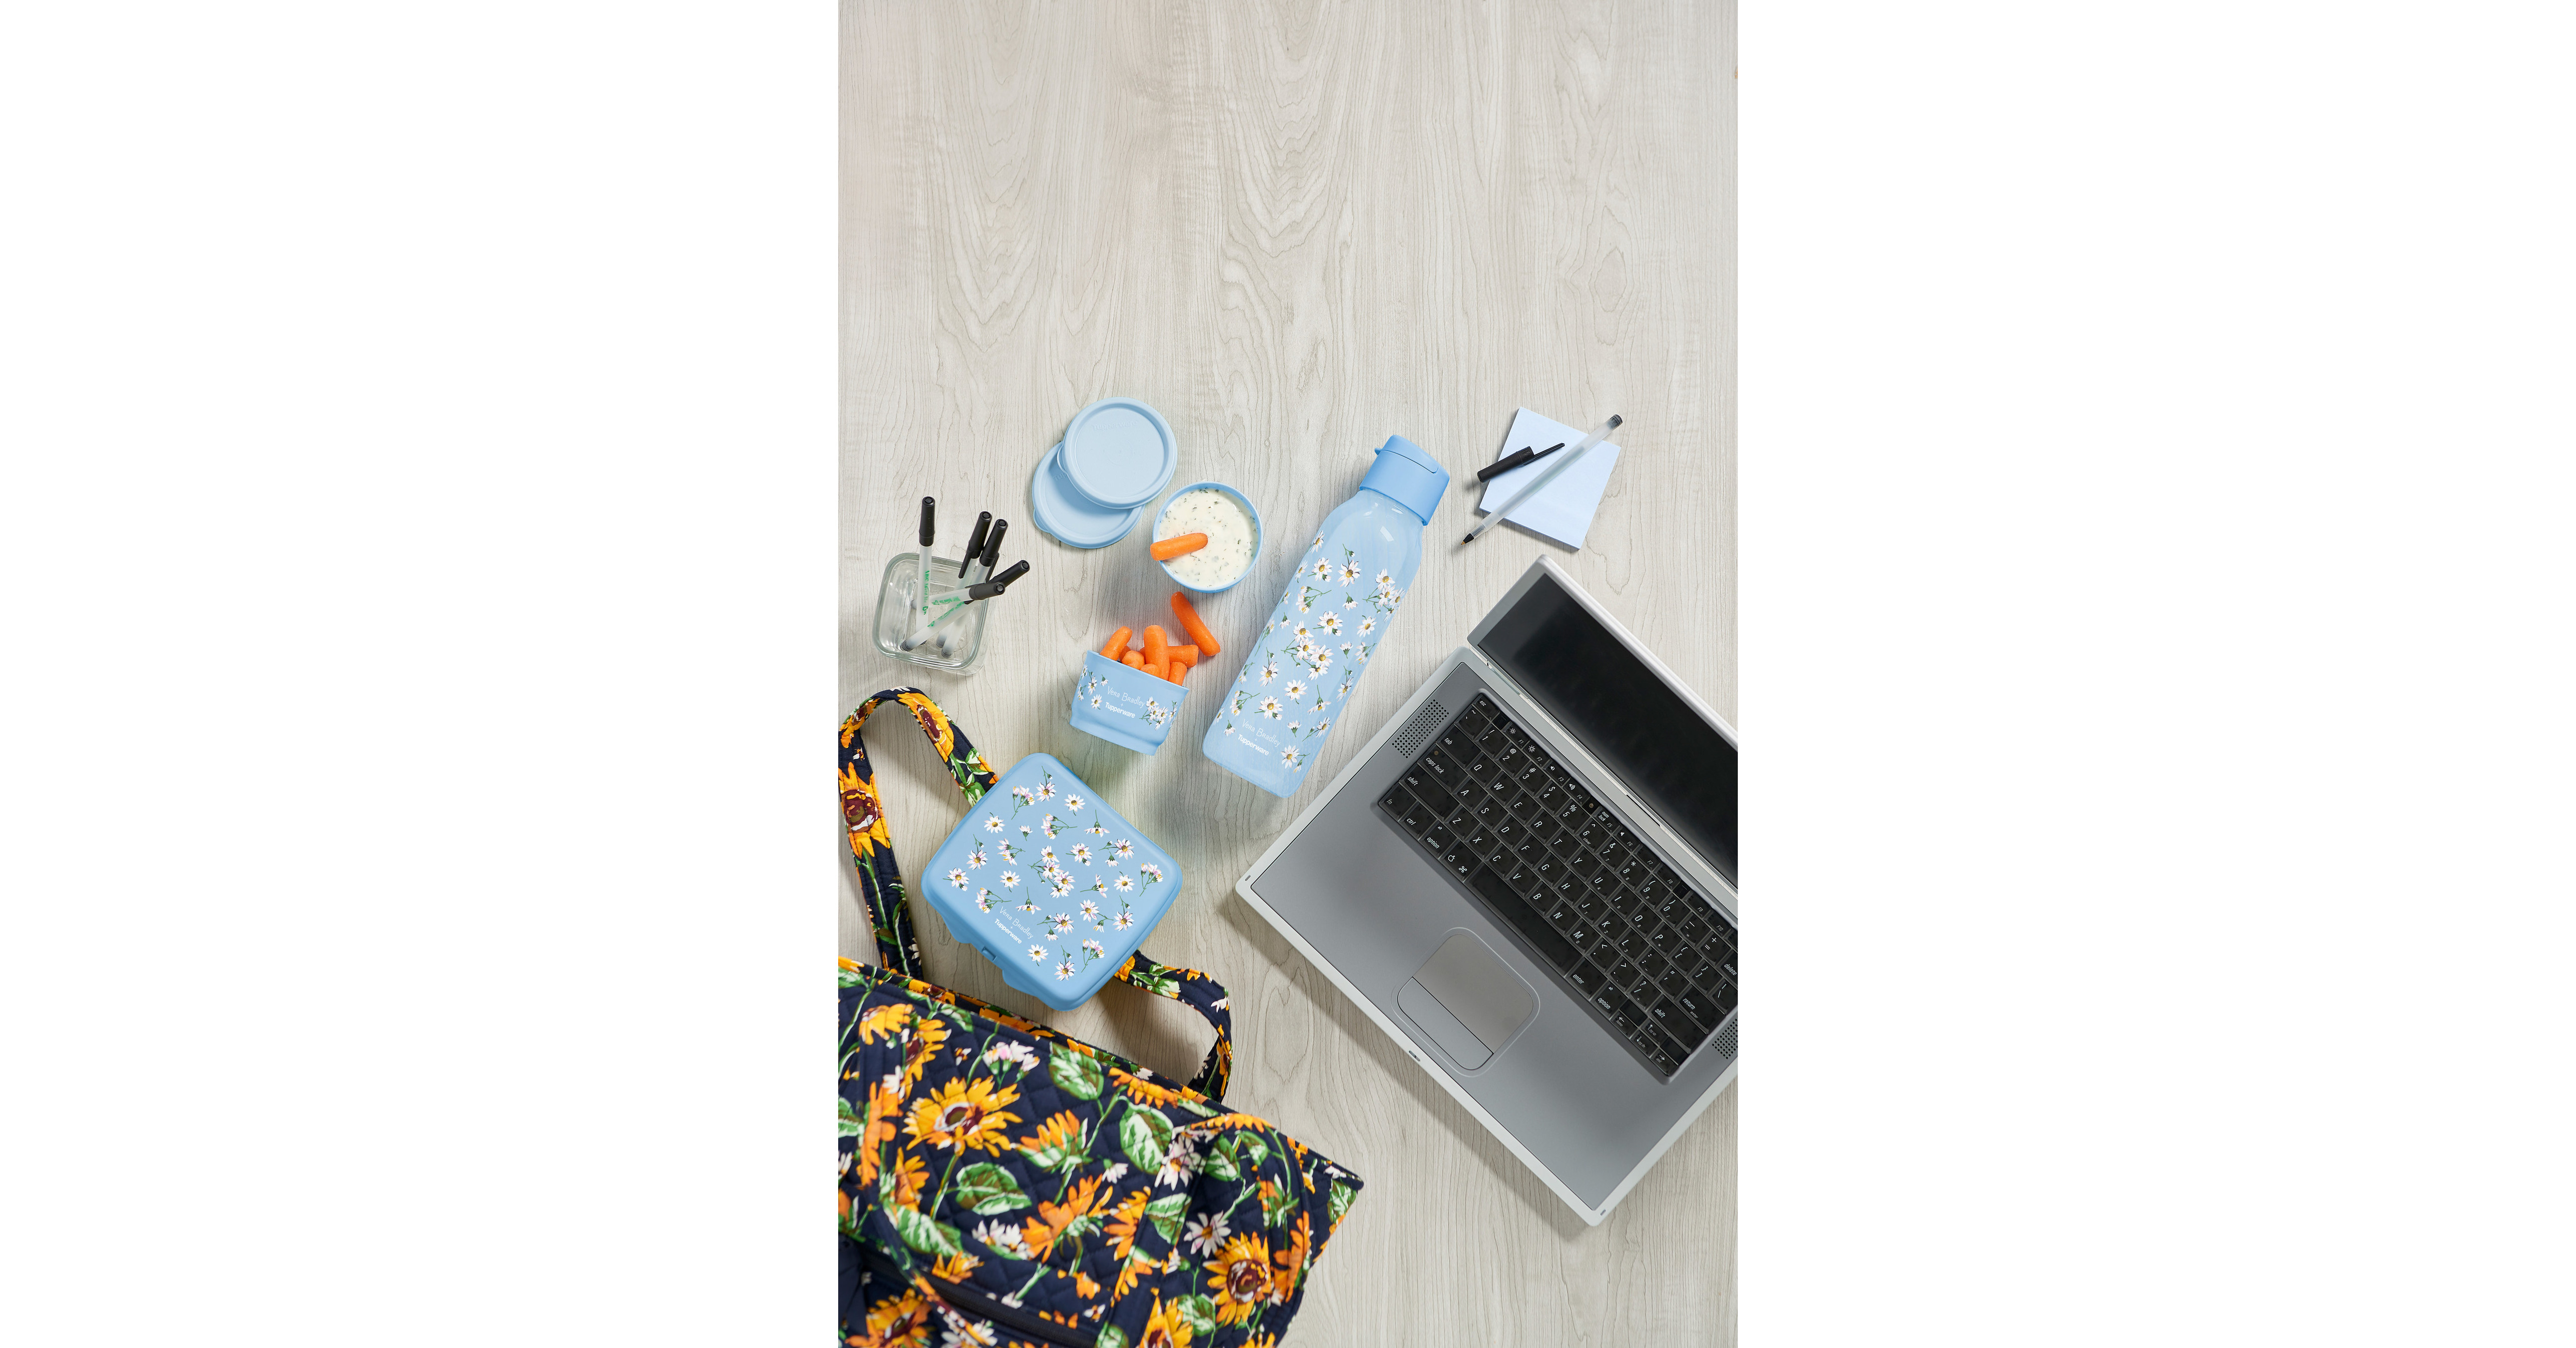 Tupperware® and Vera Bradley® Continue Collaboration With Limited-Edition  Collection of On-The-Go, Reusable Food and Beverage Products